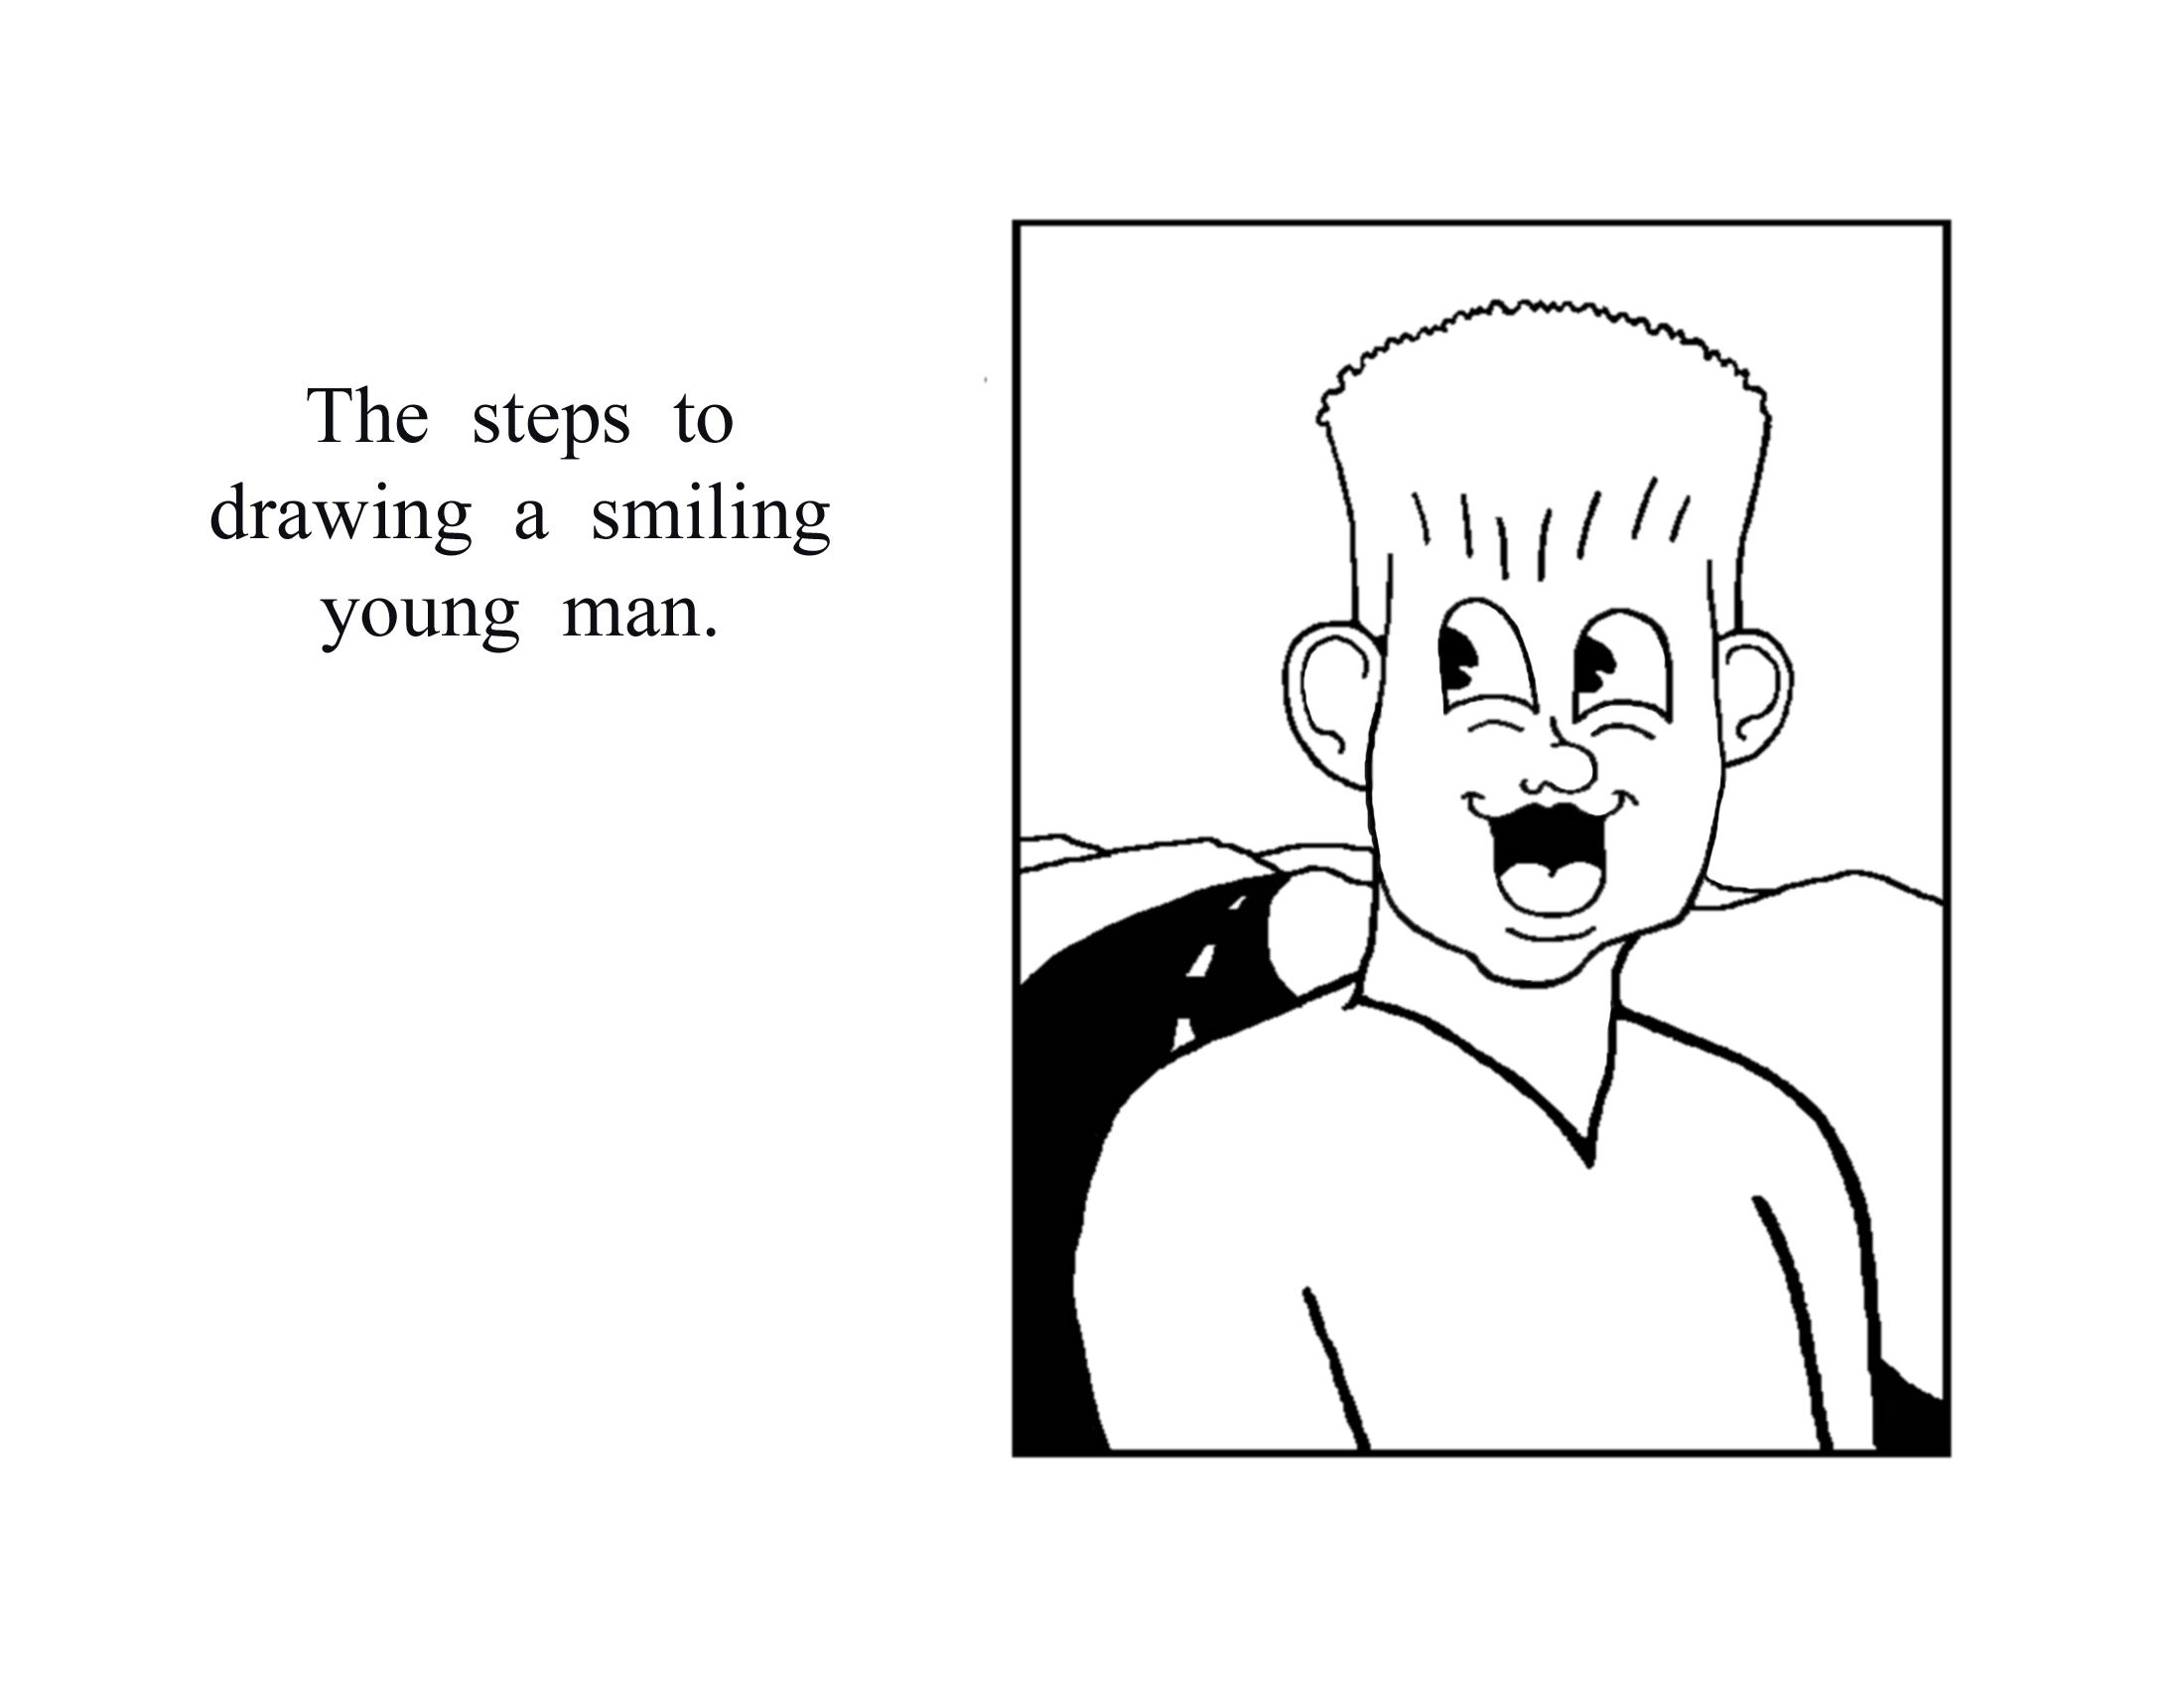 How to draw a smiling young man.